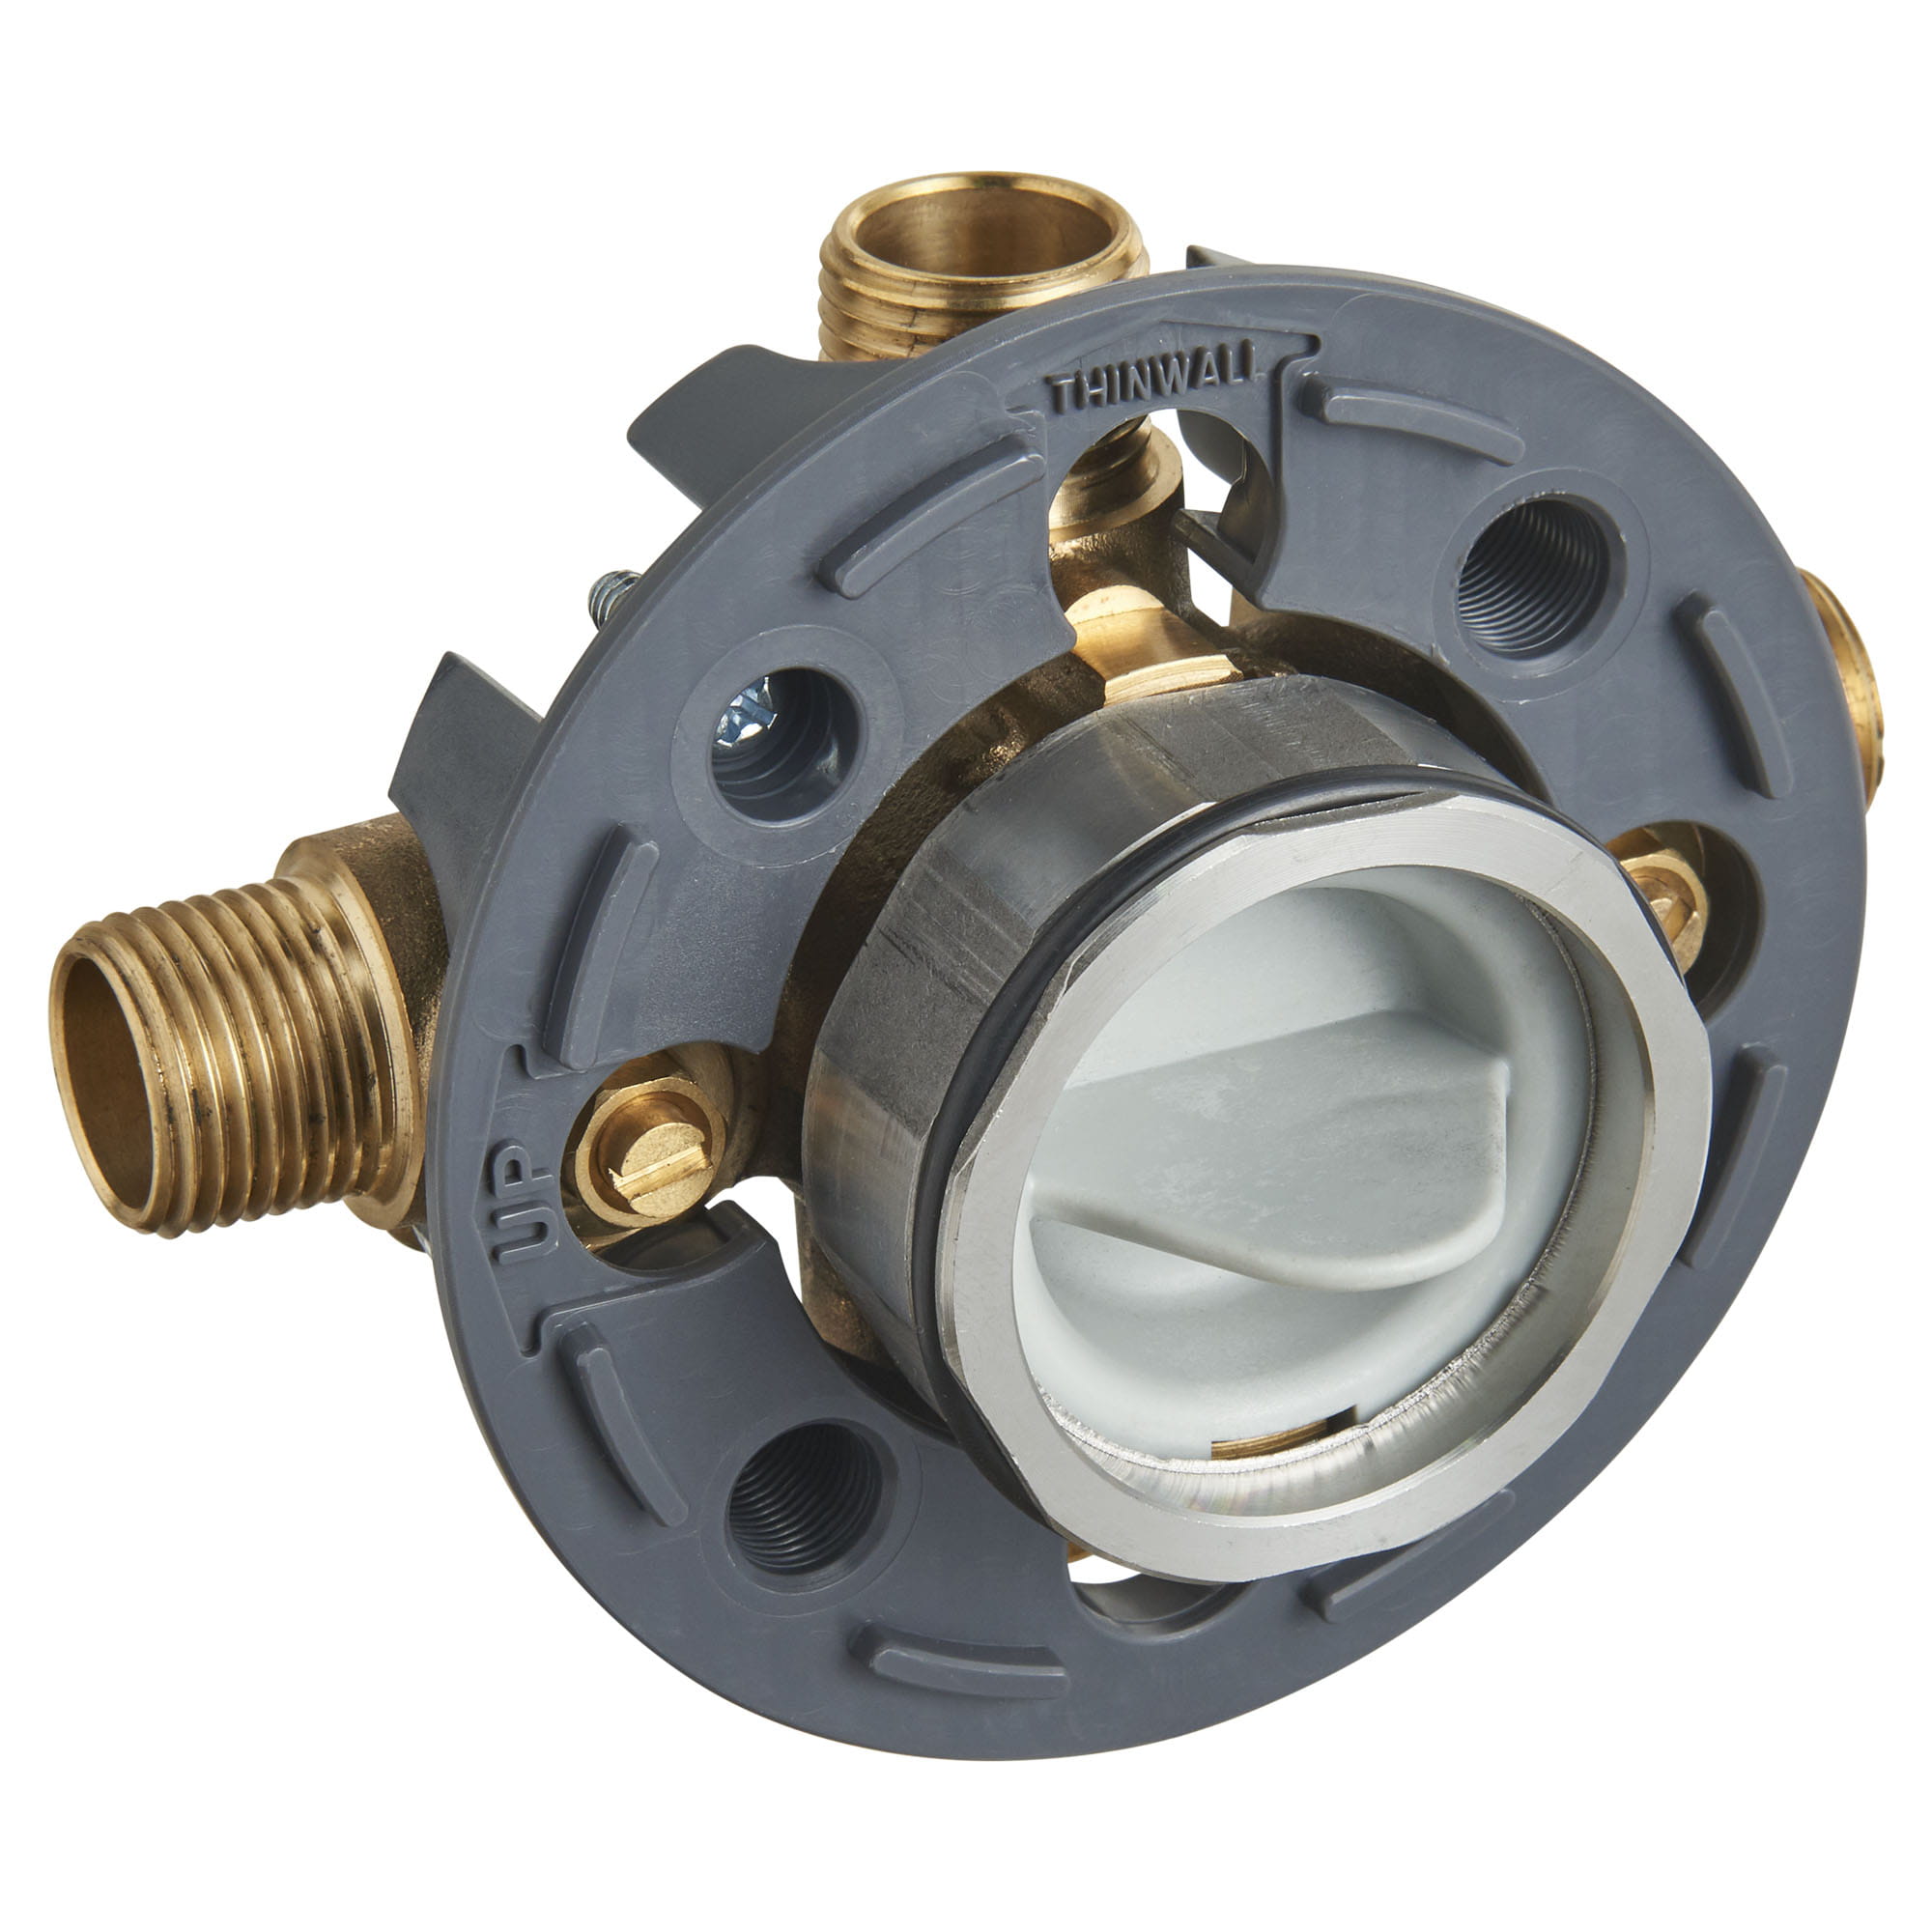 Flash® Shower Rough-In Valve With Universal Inlets/Outlets With Screwdriver Stops